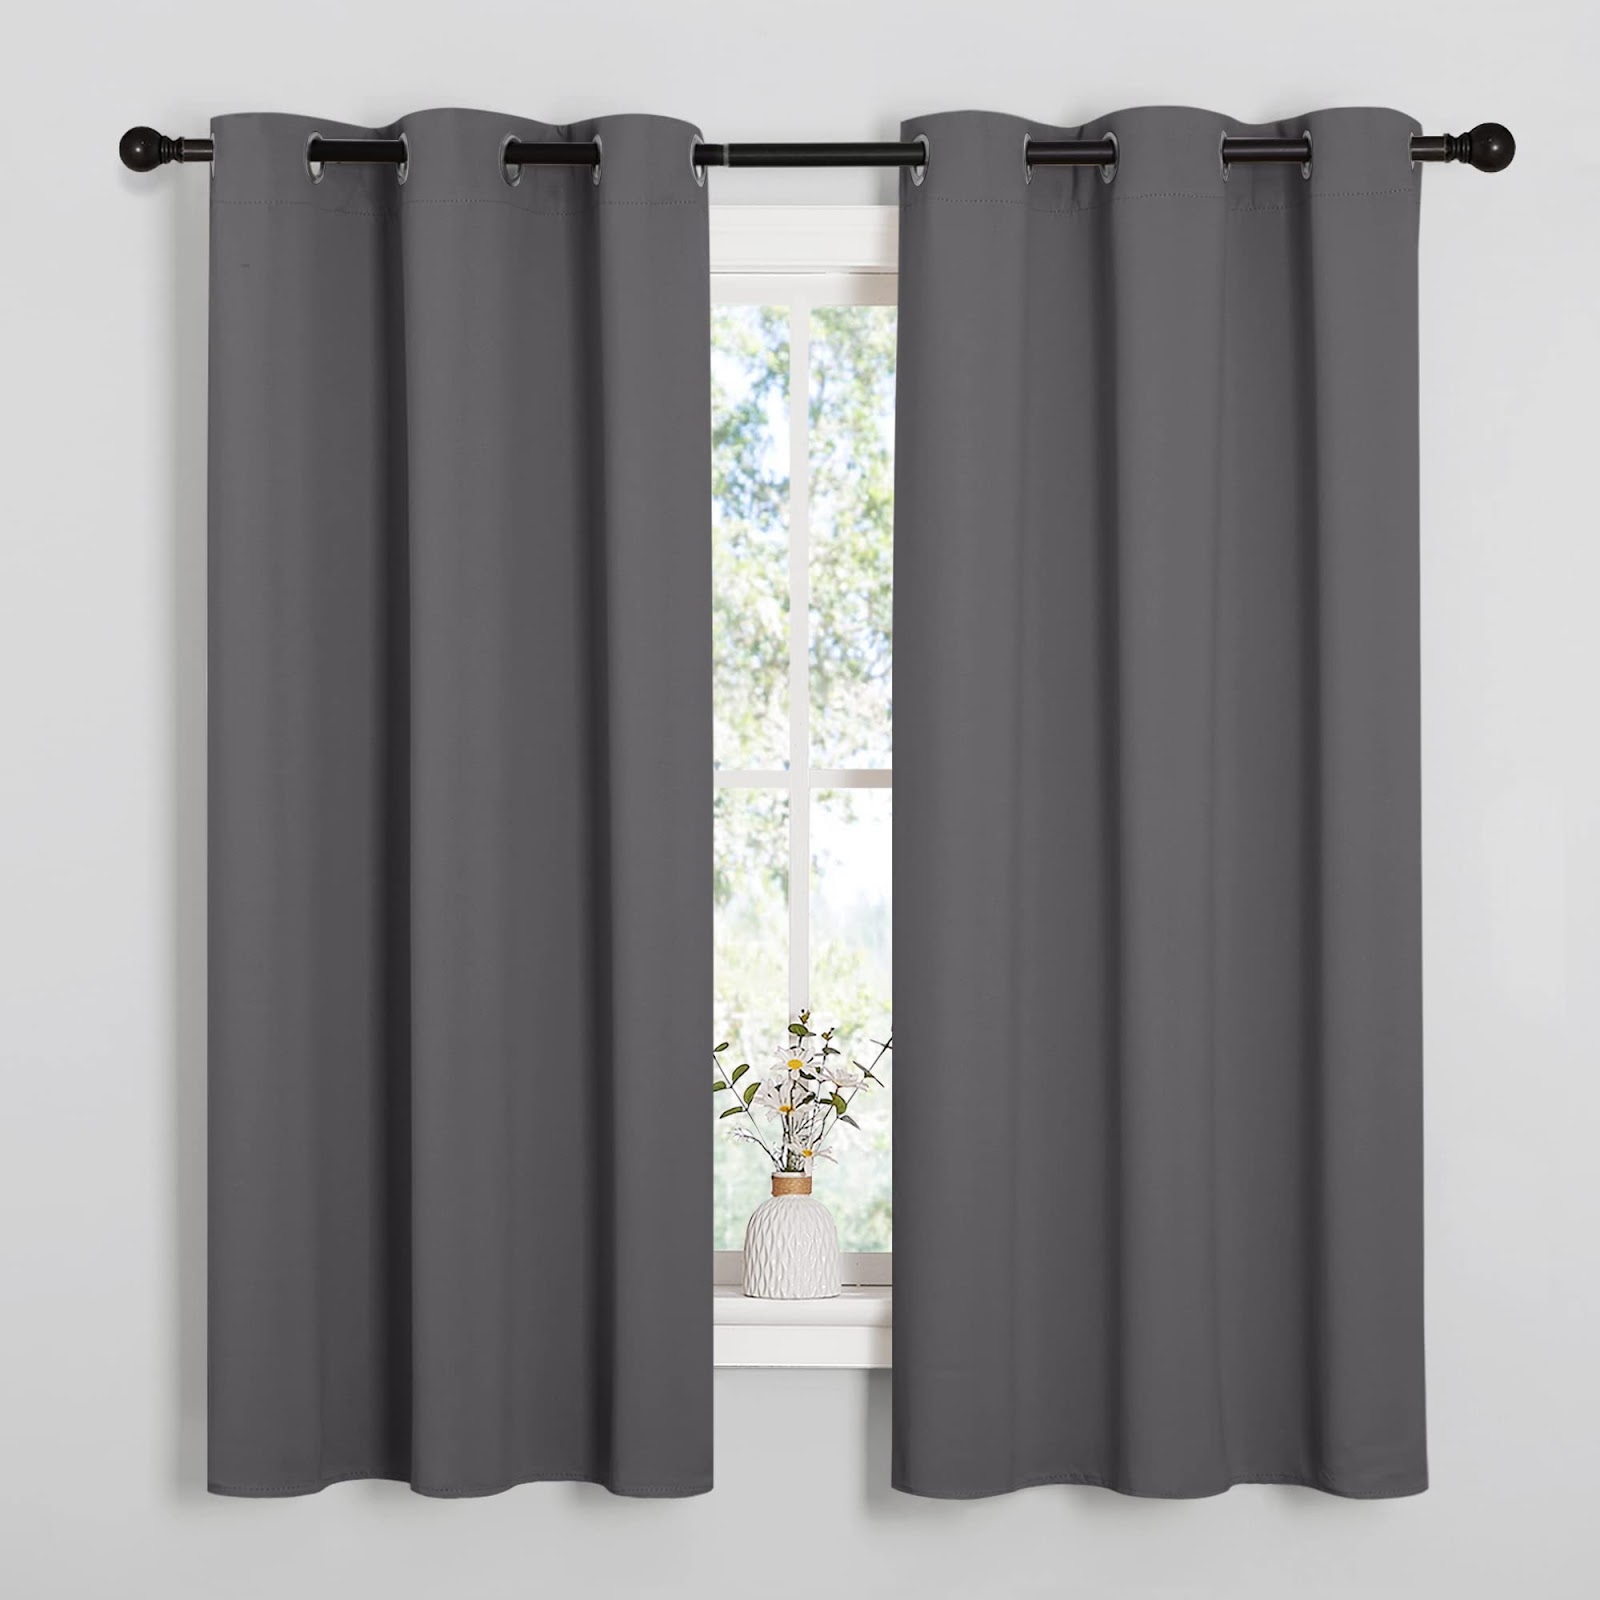 NICETOWN Thermal Insulated Blackout Curtain